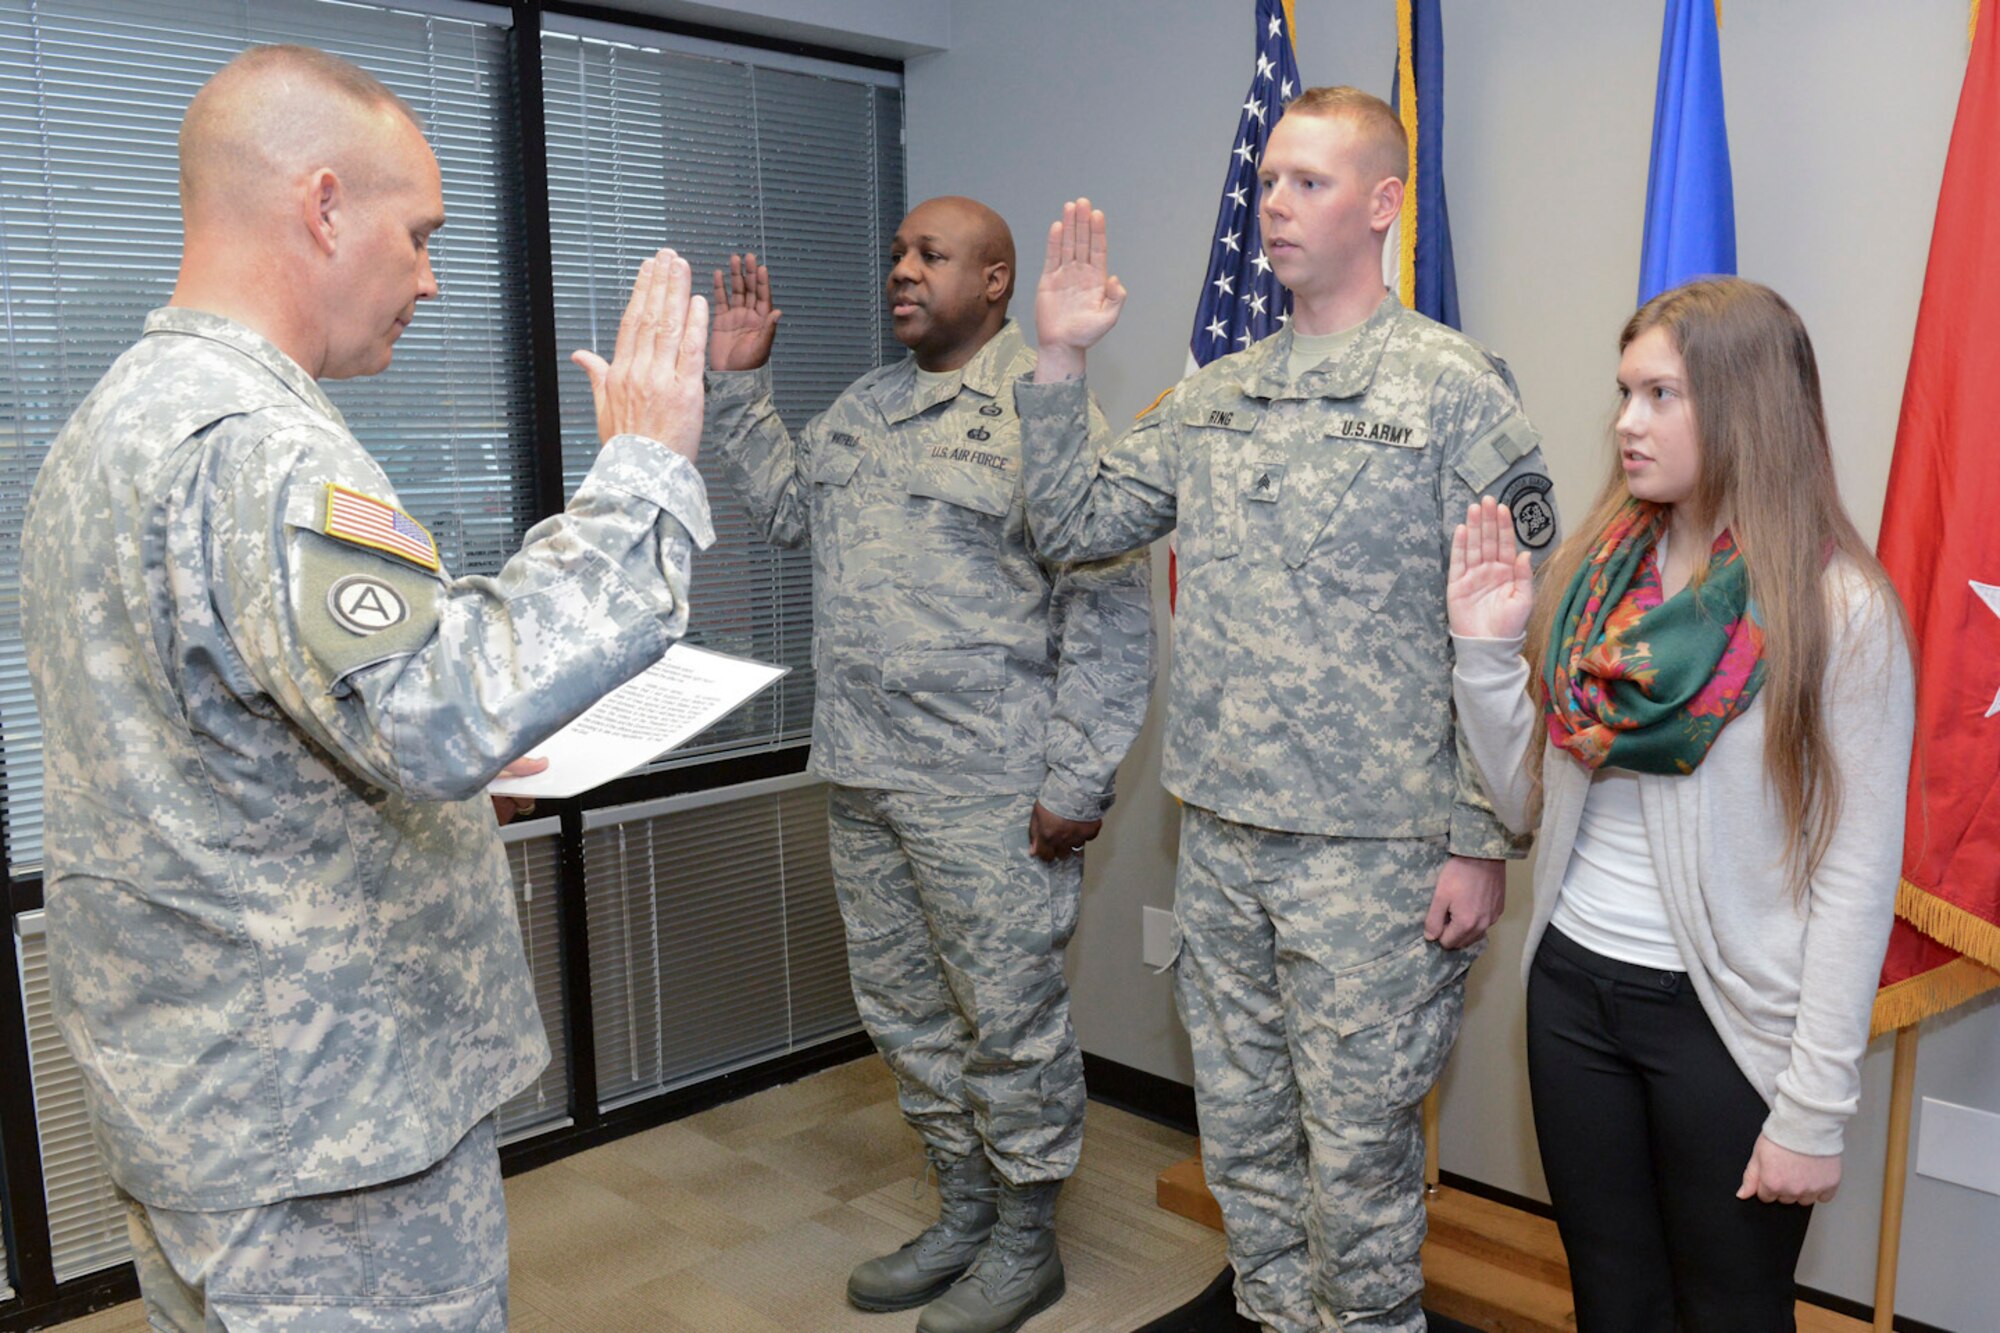 The Adjutant General of the Iowa National Guard, Maj. Gen. Timothy Orr (left) swears in the three newest members of the 132d Wing (132WG) as members of the Iowa Air and Army National Guard celebrate the opening of the 132WG, Des Moines, Iowa off-site Recruiting Operation Center during a ribbon cutting ceremony held at the new Recruiting Operation Center in West Des Moines, Iowa on Tuesday, March 24, 2015.  (U.S. Air National Guard photo by Staff Sgt. Linda K. Burger/Released)